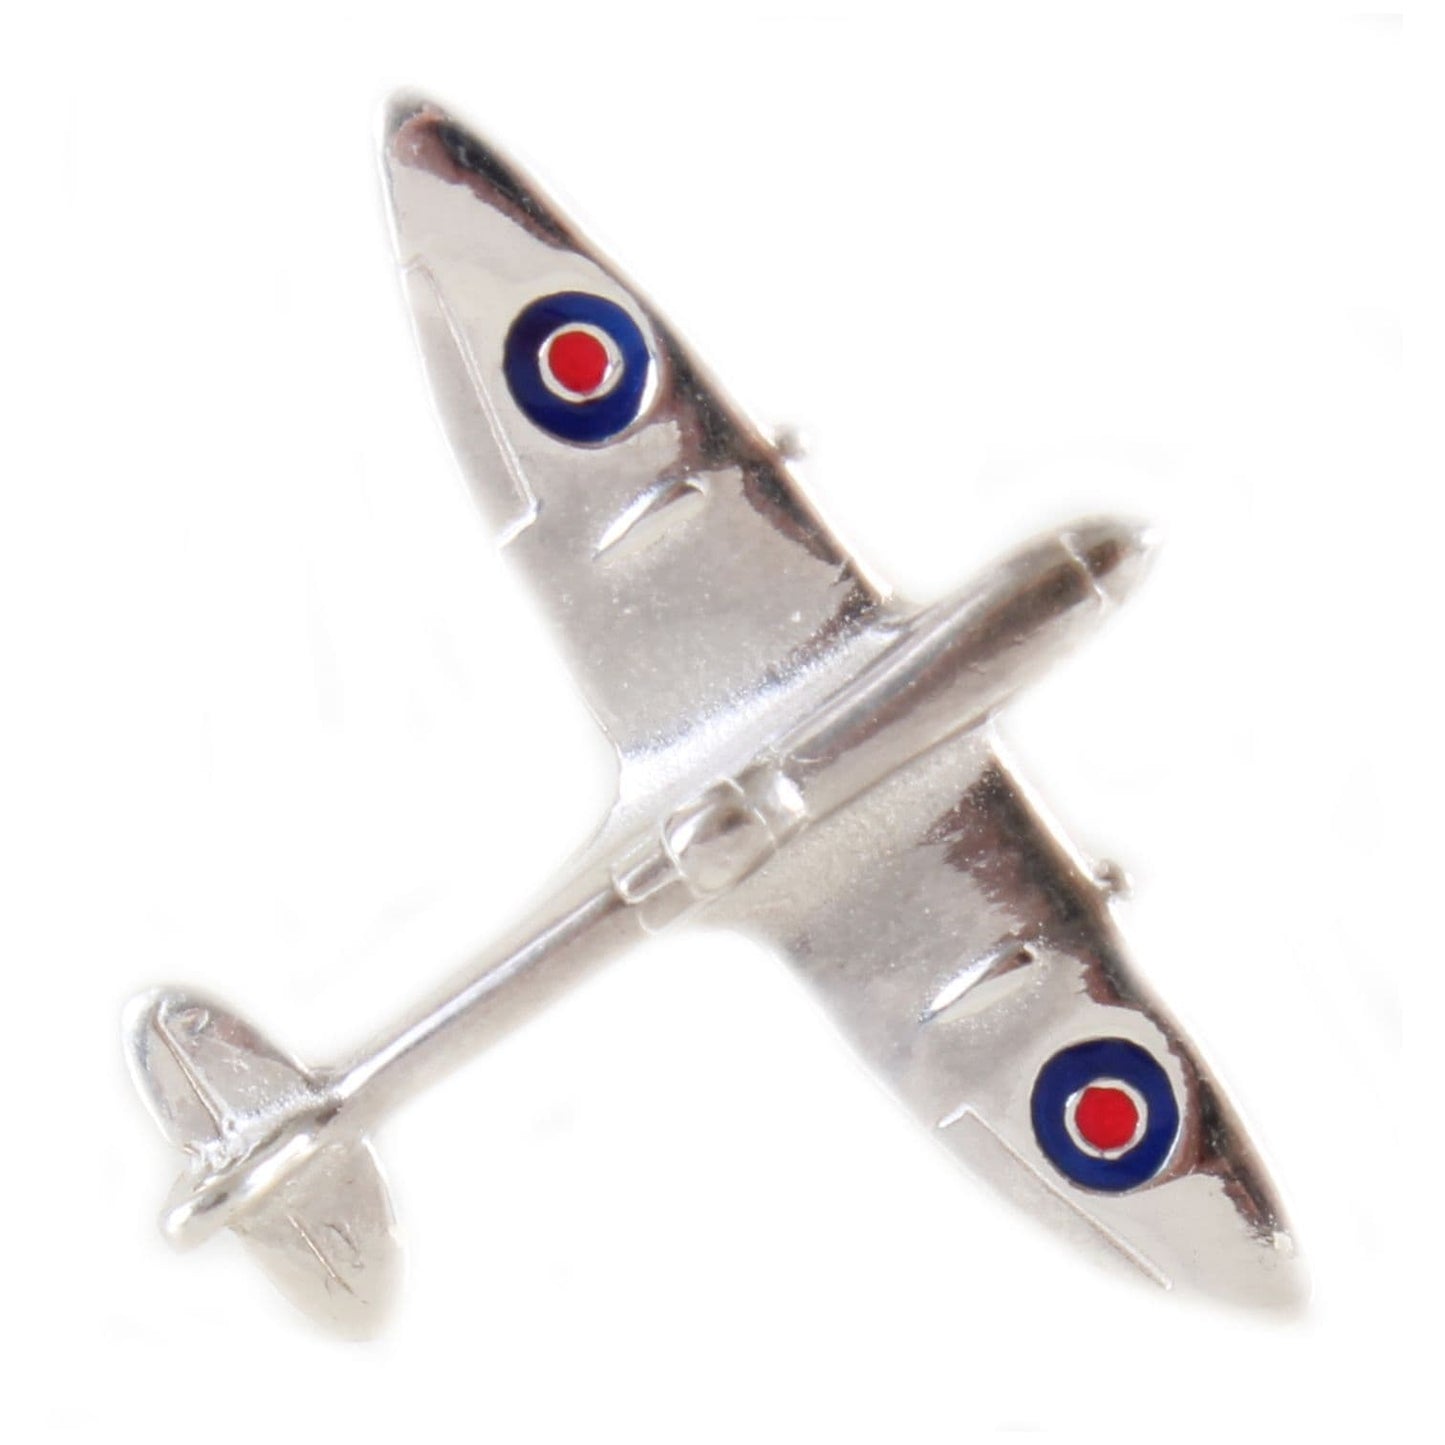 Tie Pin Sterling Silver Spitfire Shaped Tie Tac